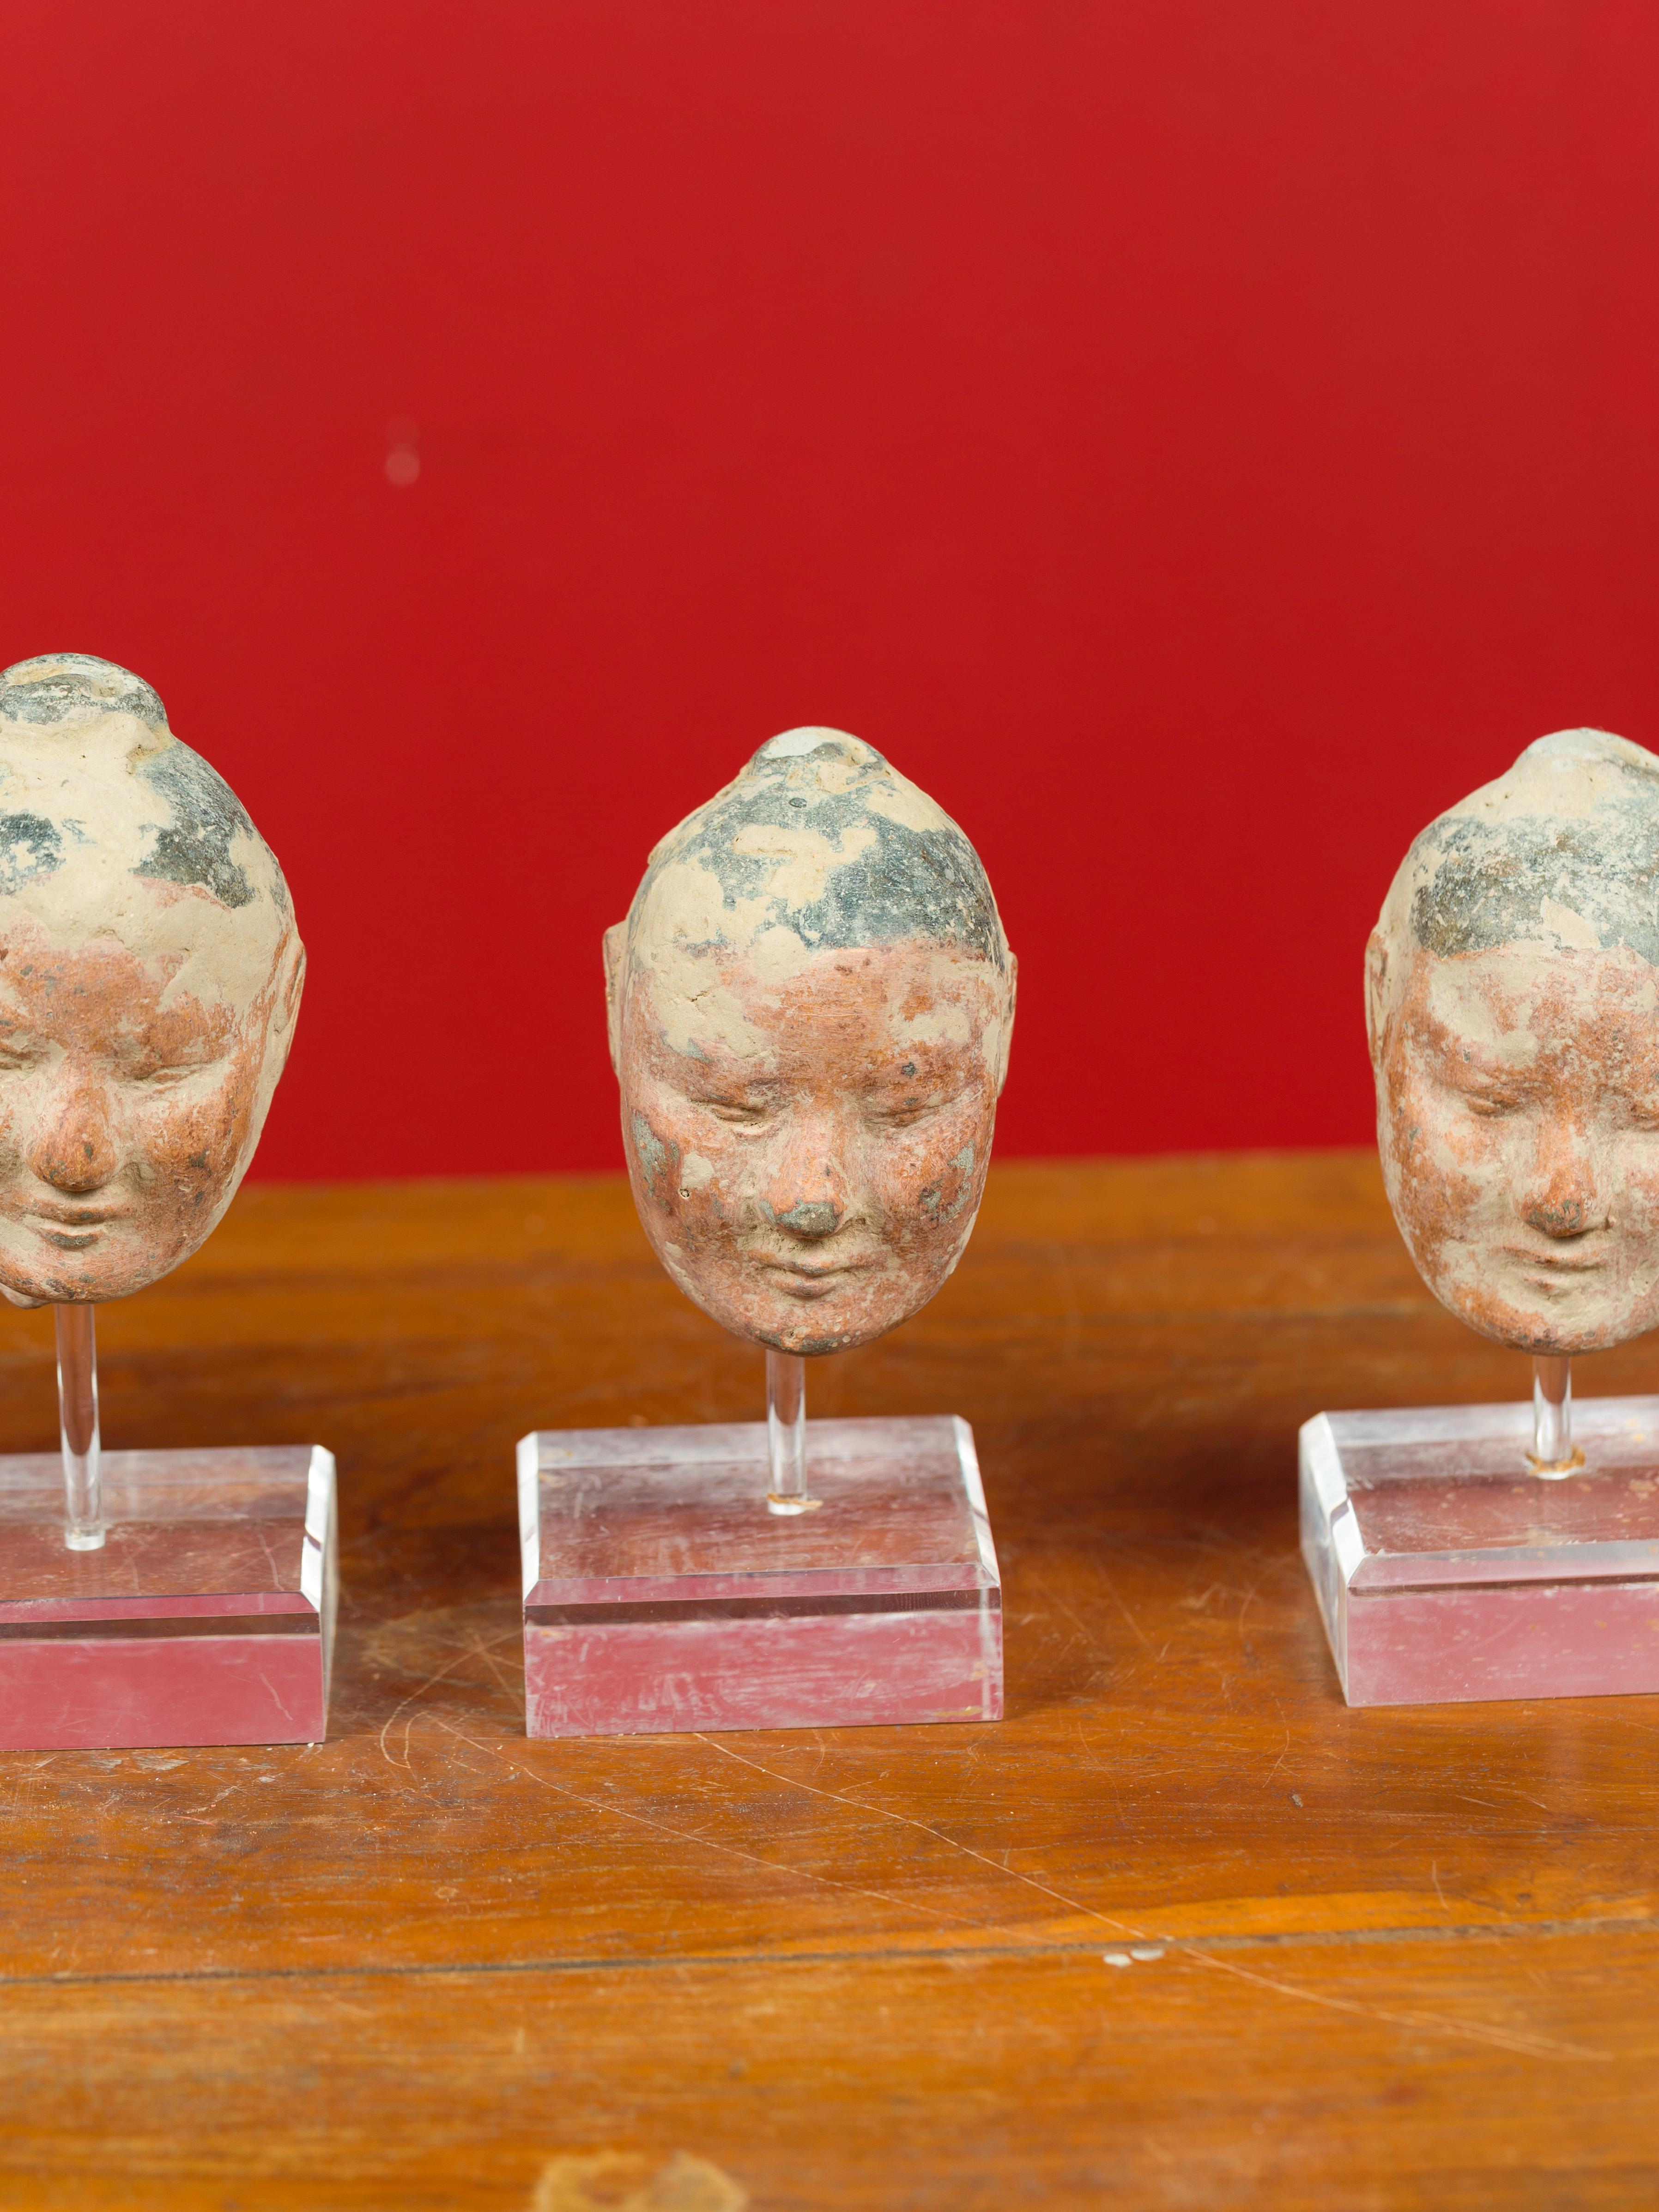 Set of Five Chinese Han Dynasty Terracotta Heads with Original Paint on Lucite 1